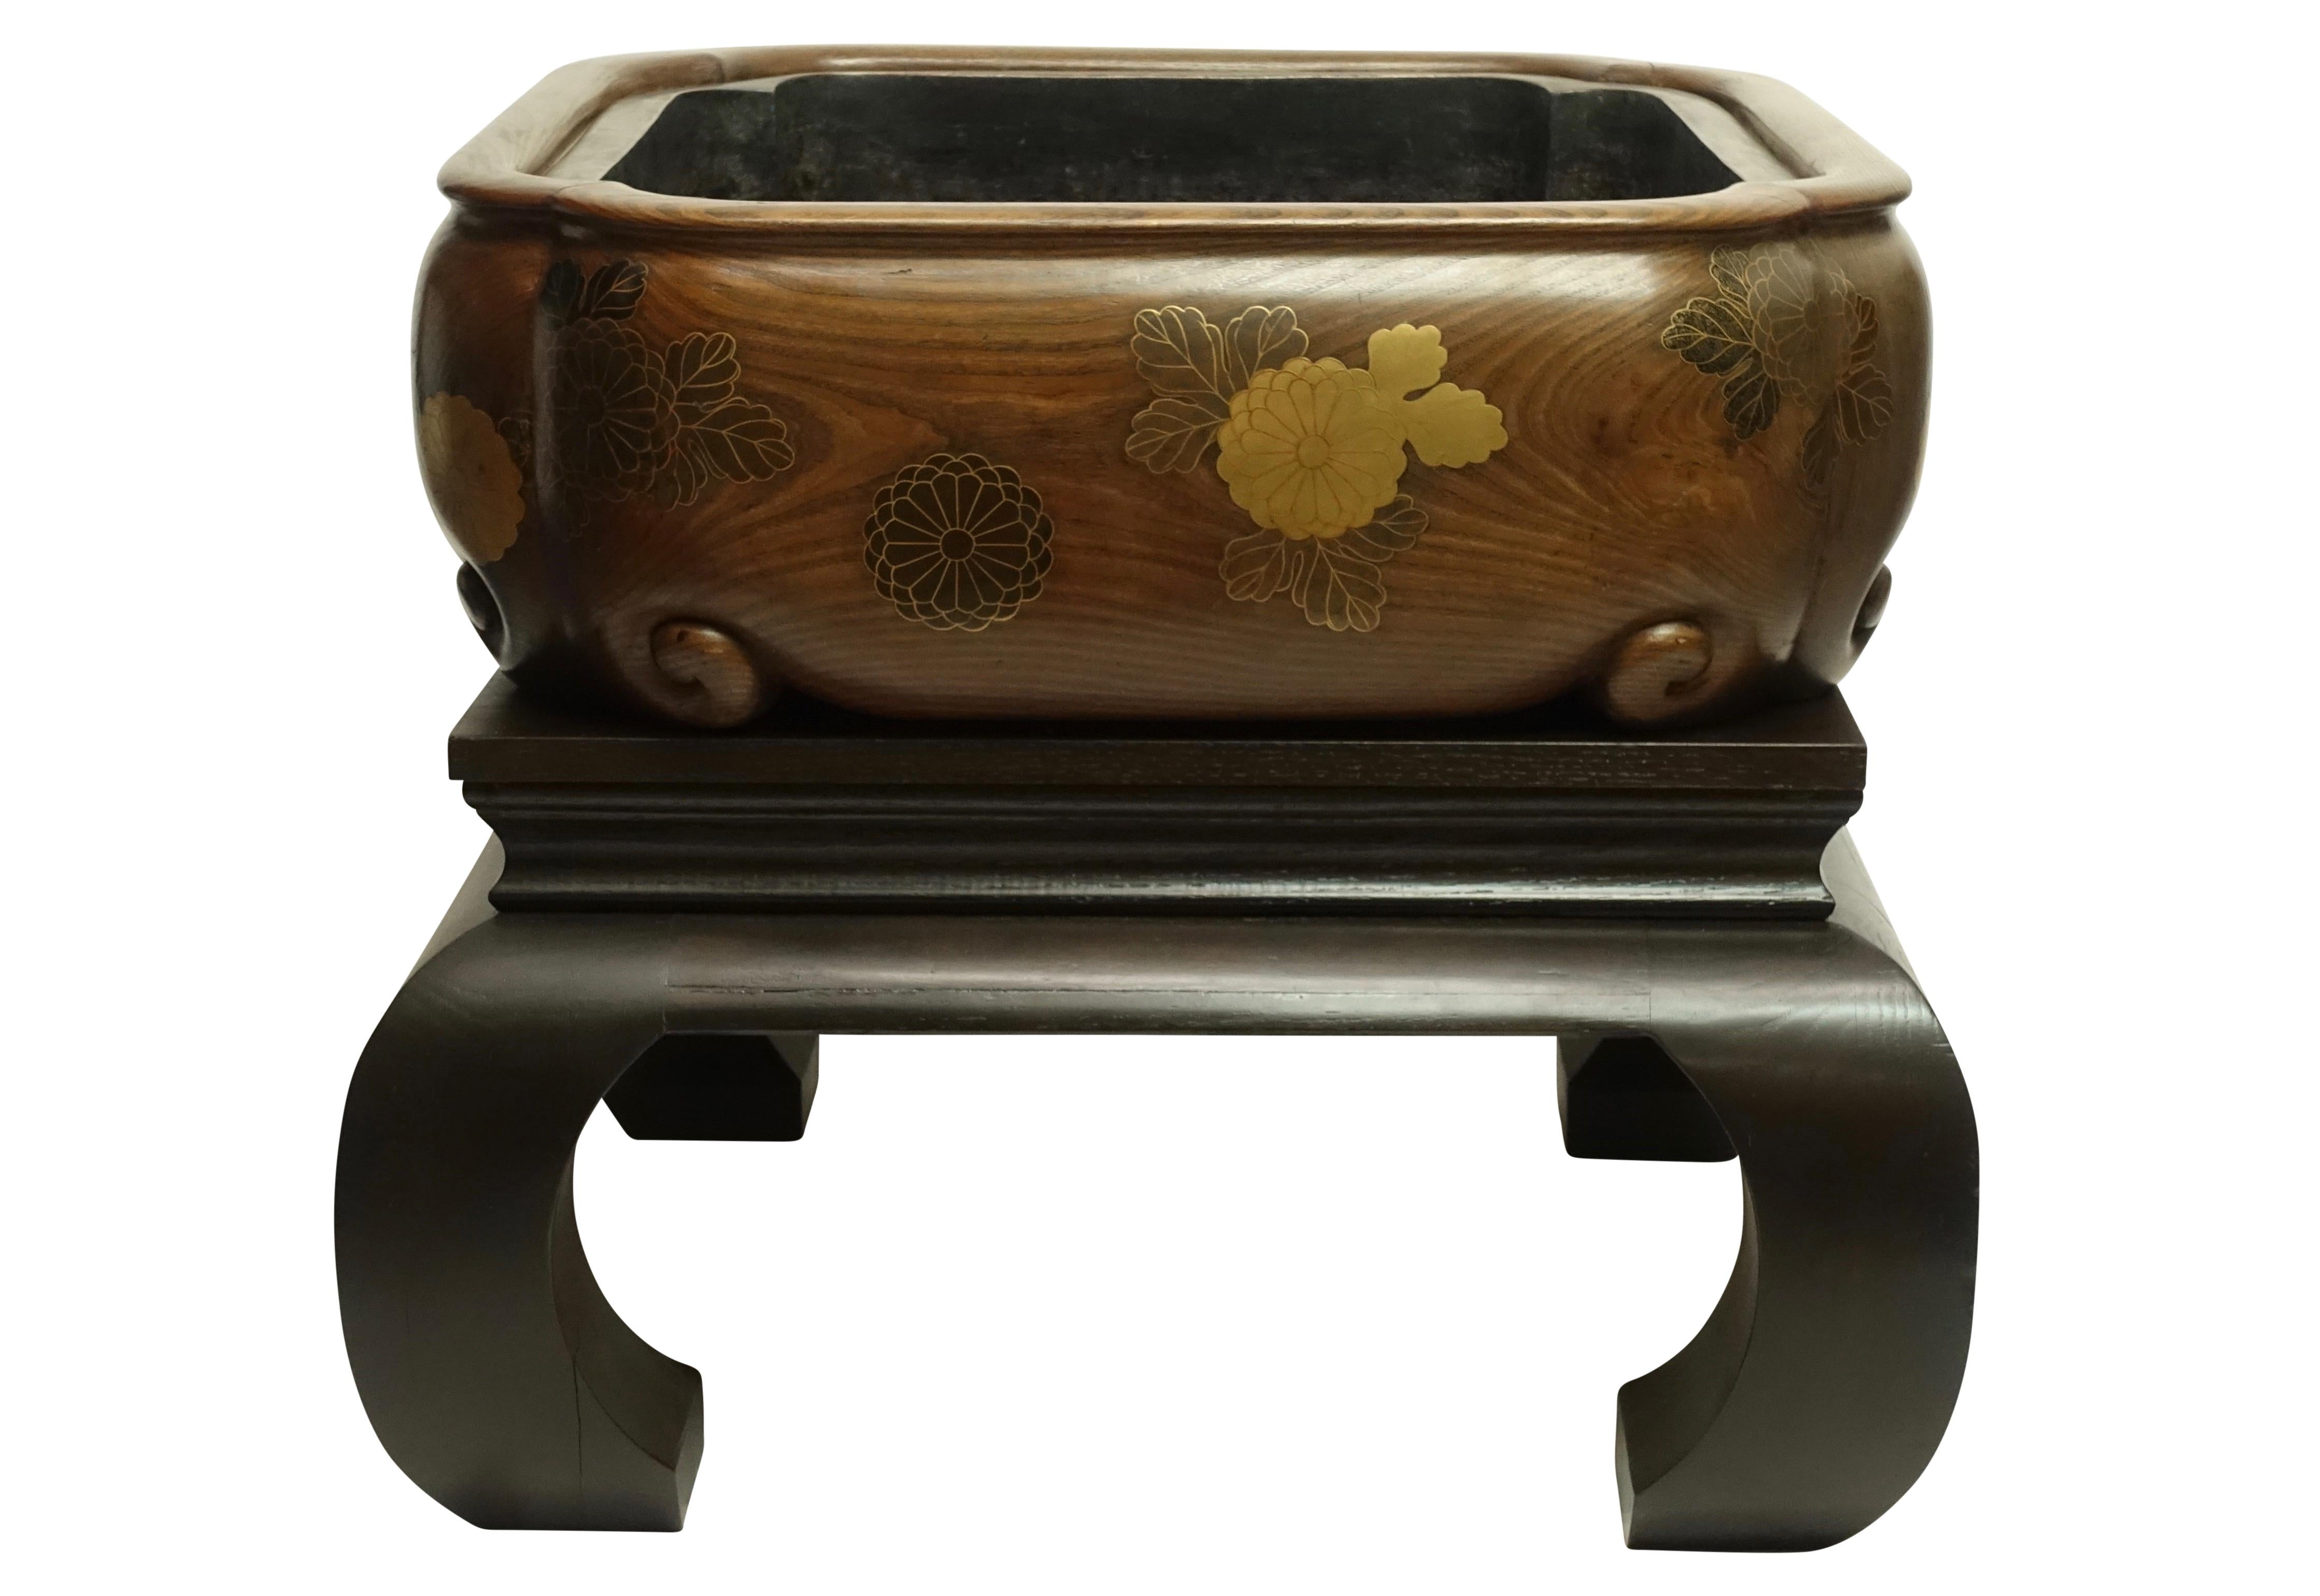 Extremely fine quality and very large size hibachi with original copper liner. Lacquer over solid chestnut with custom made stand. Japan, late 19th century.